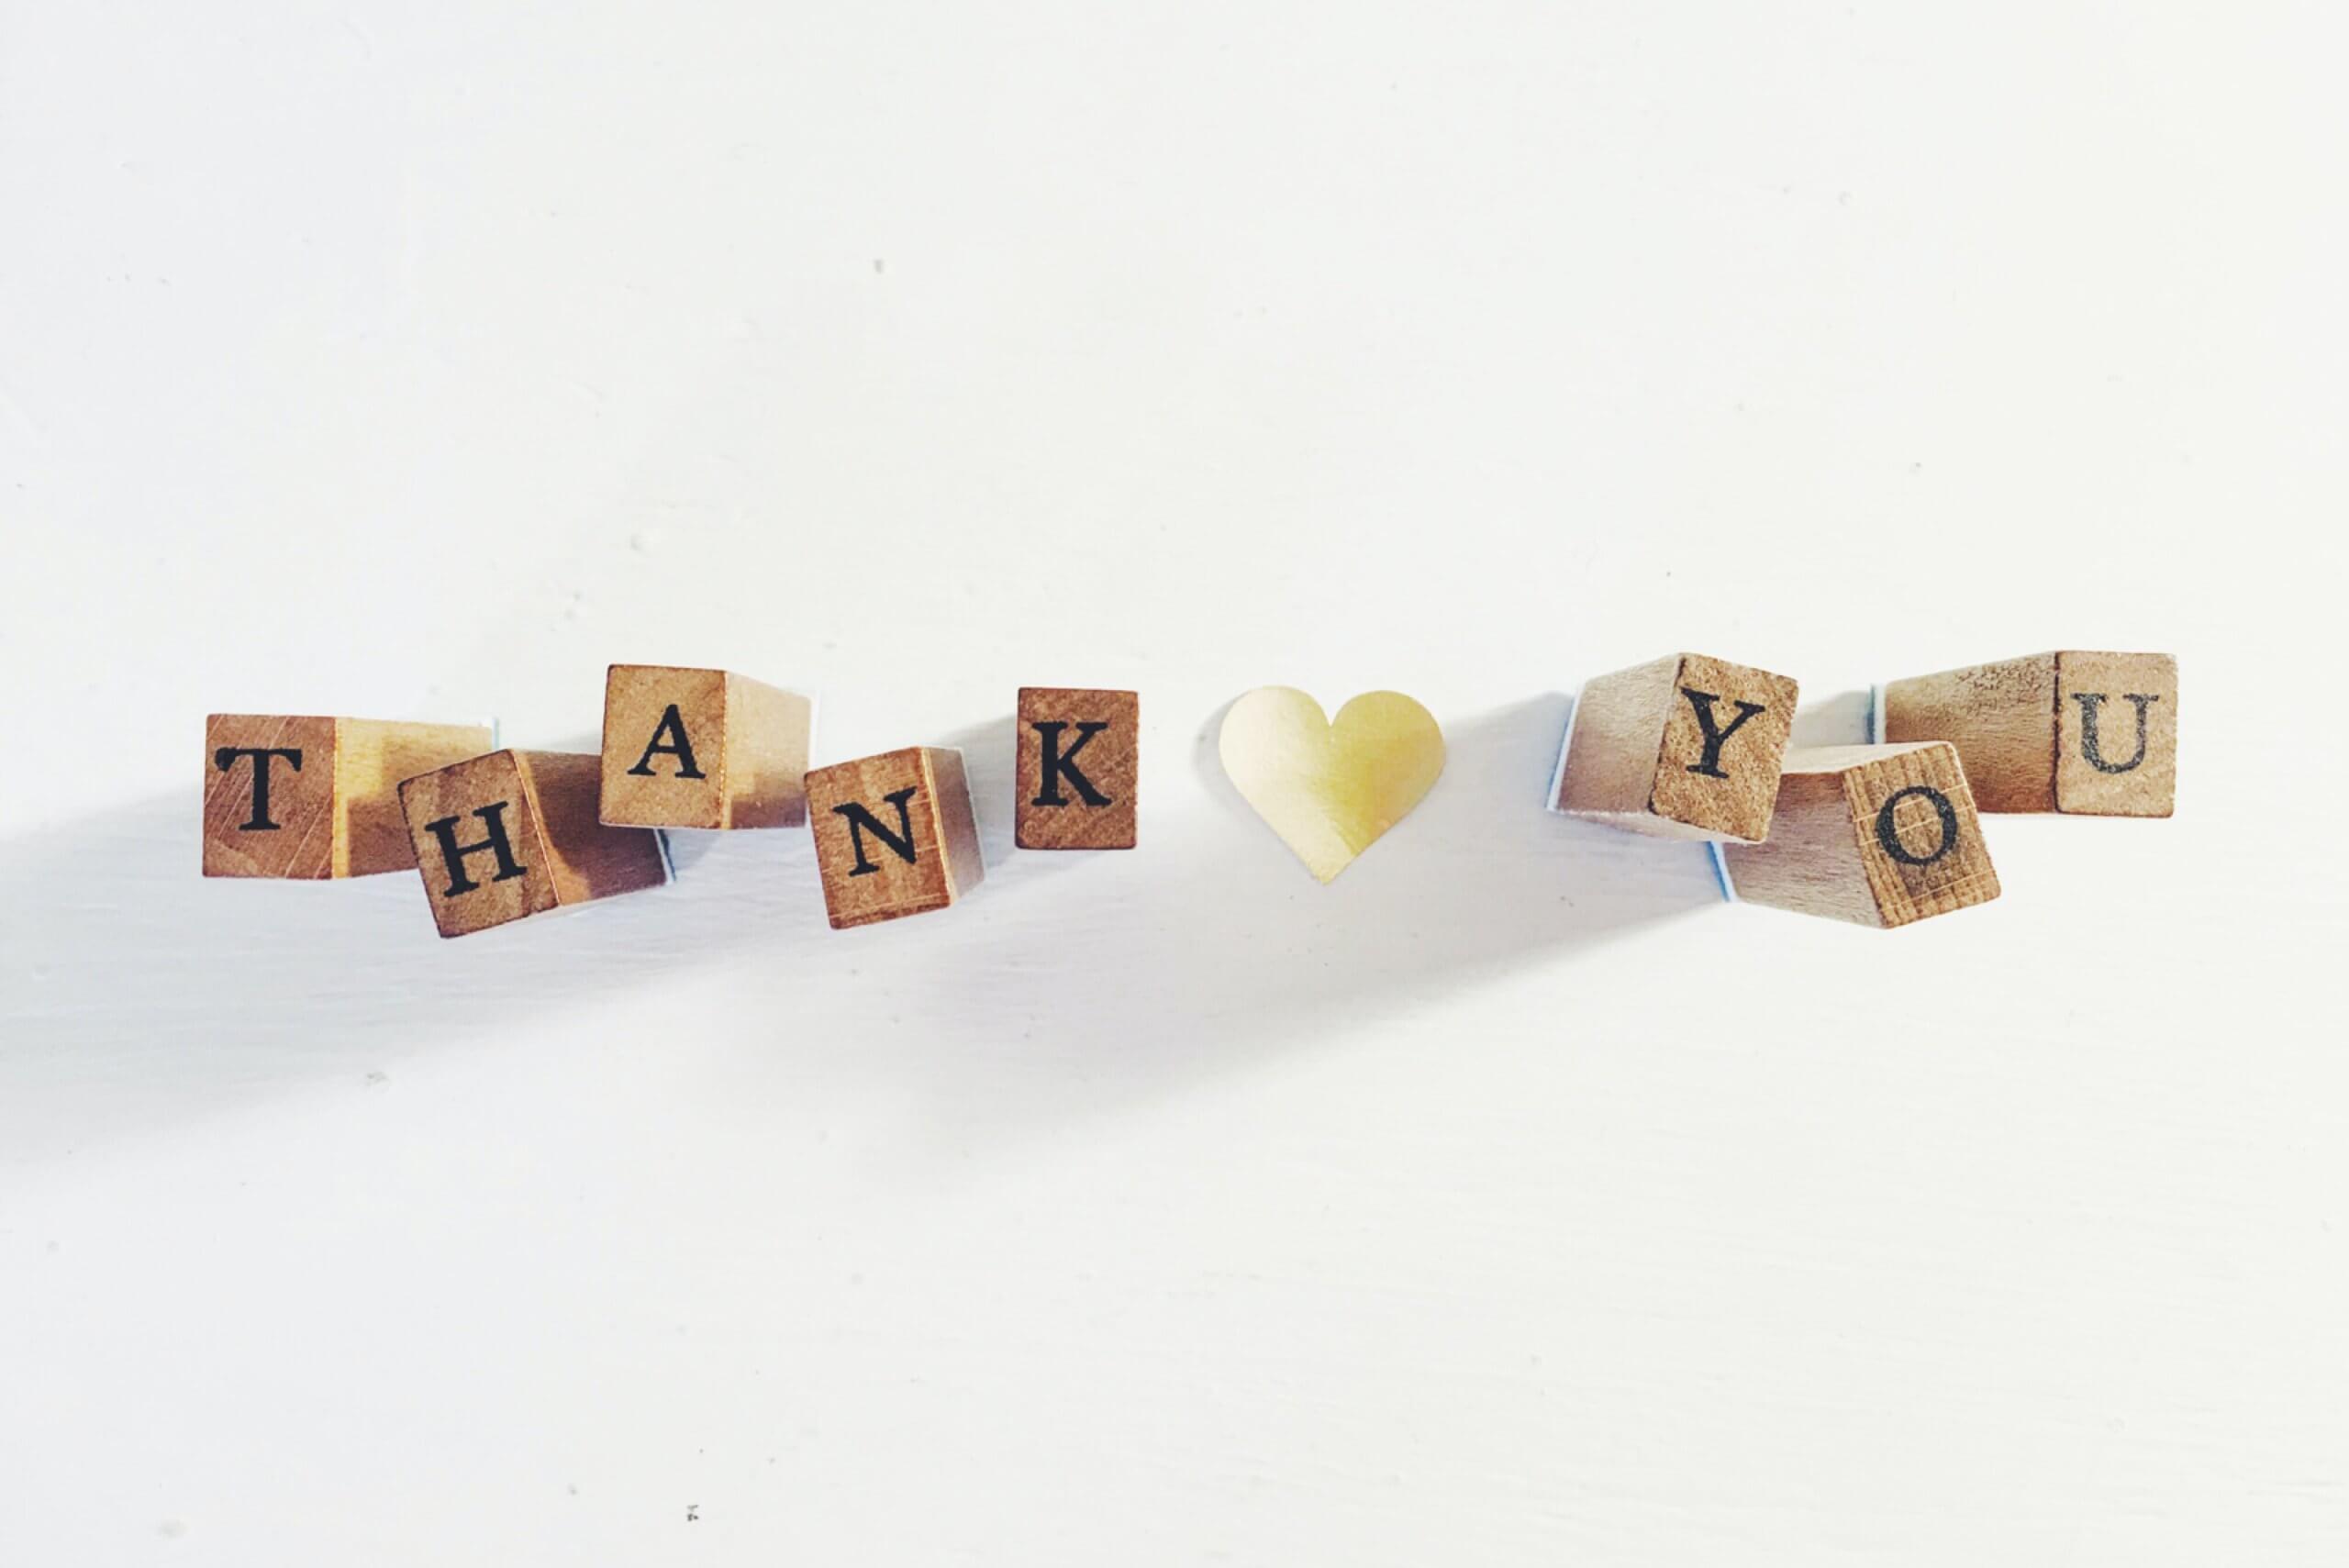 6 Ways to Shake Up How You Say ‘Thank You!’